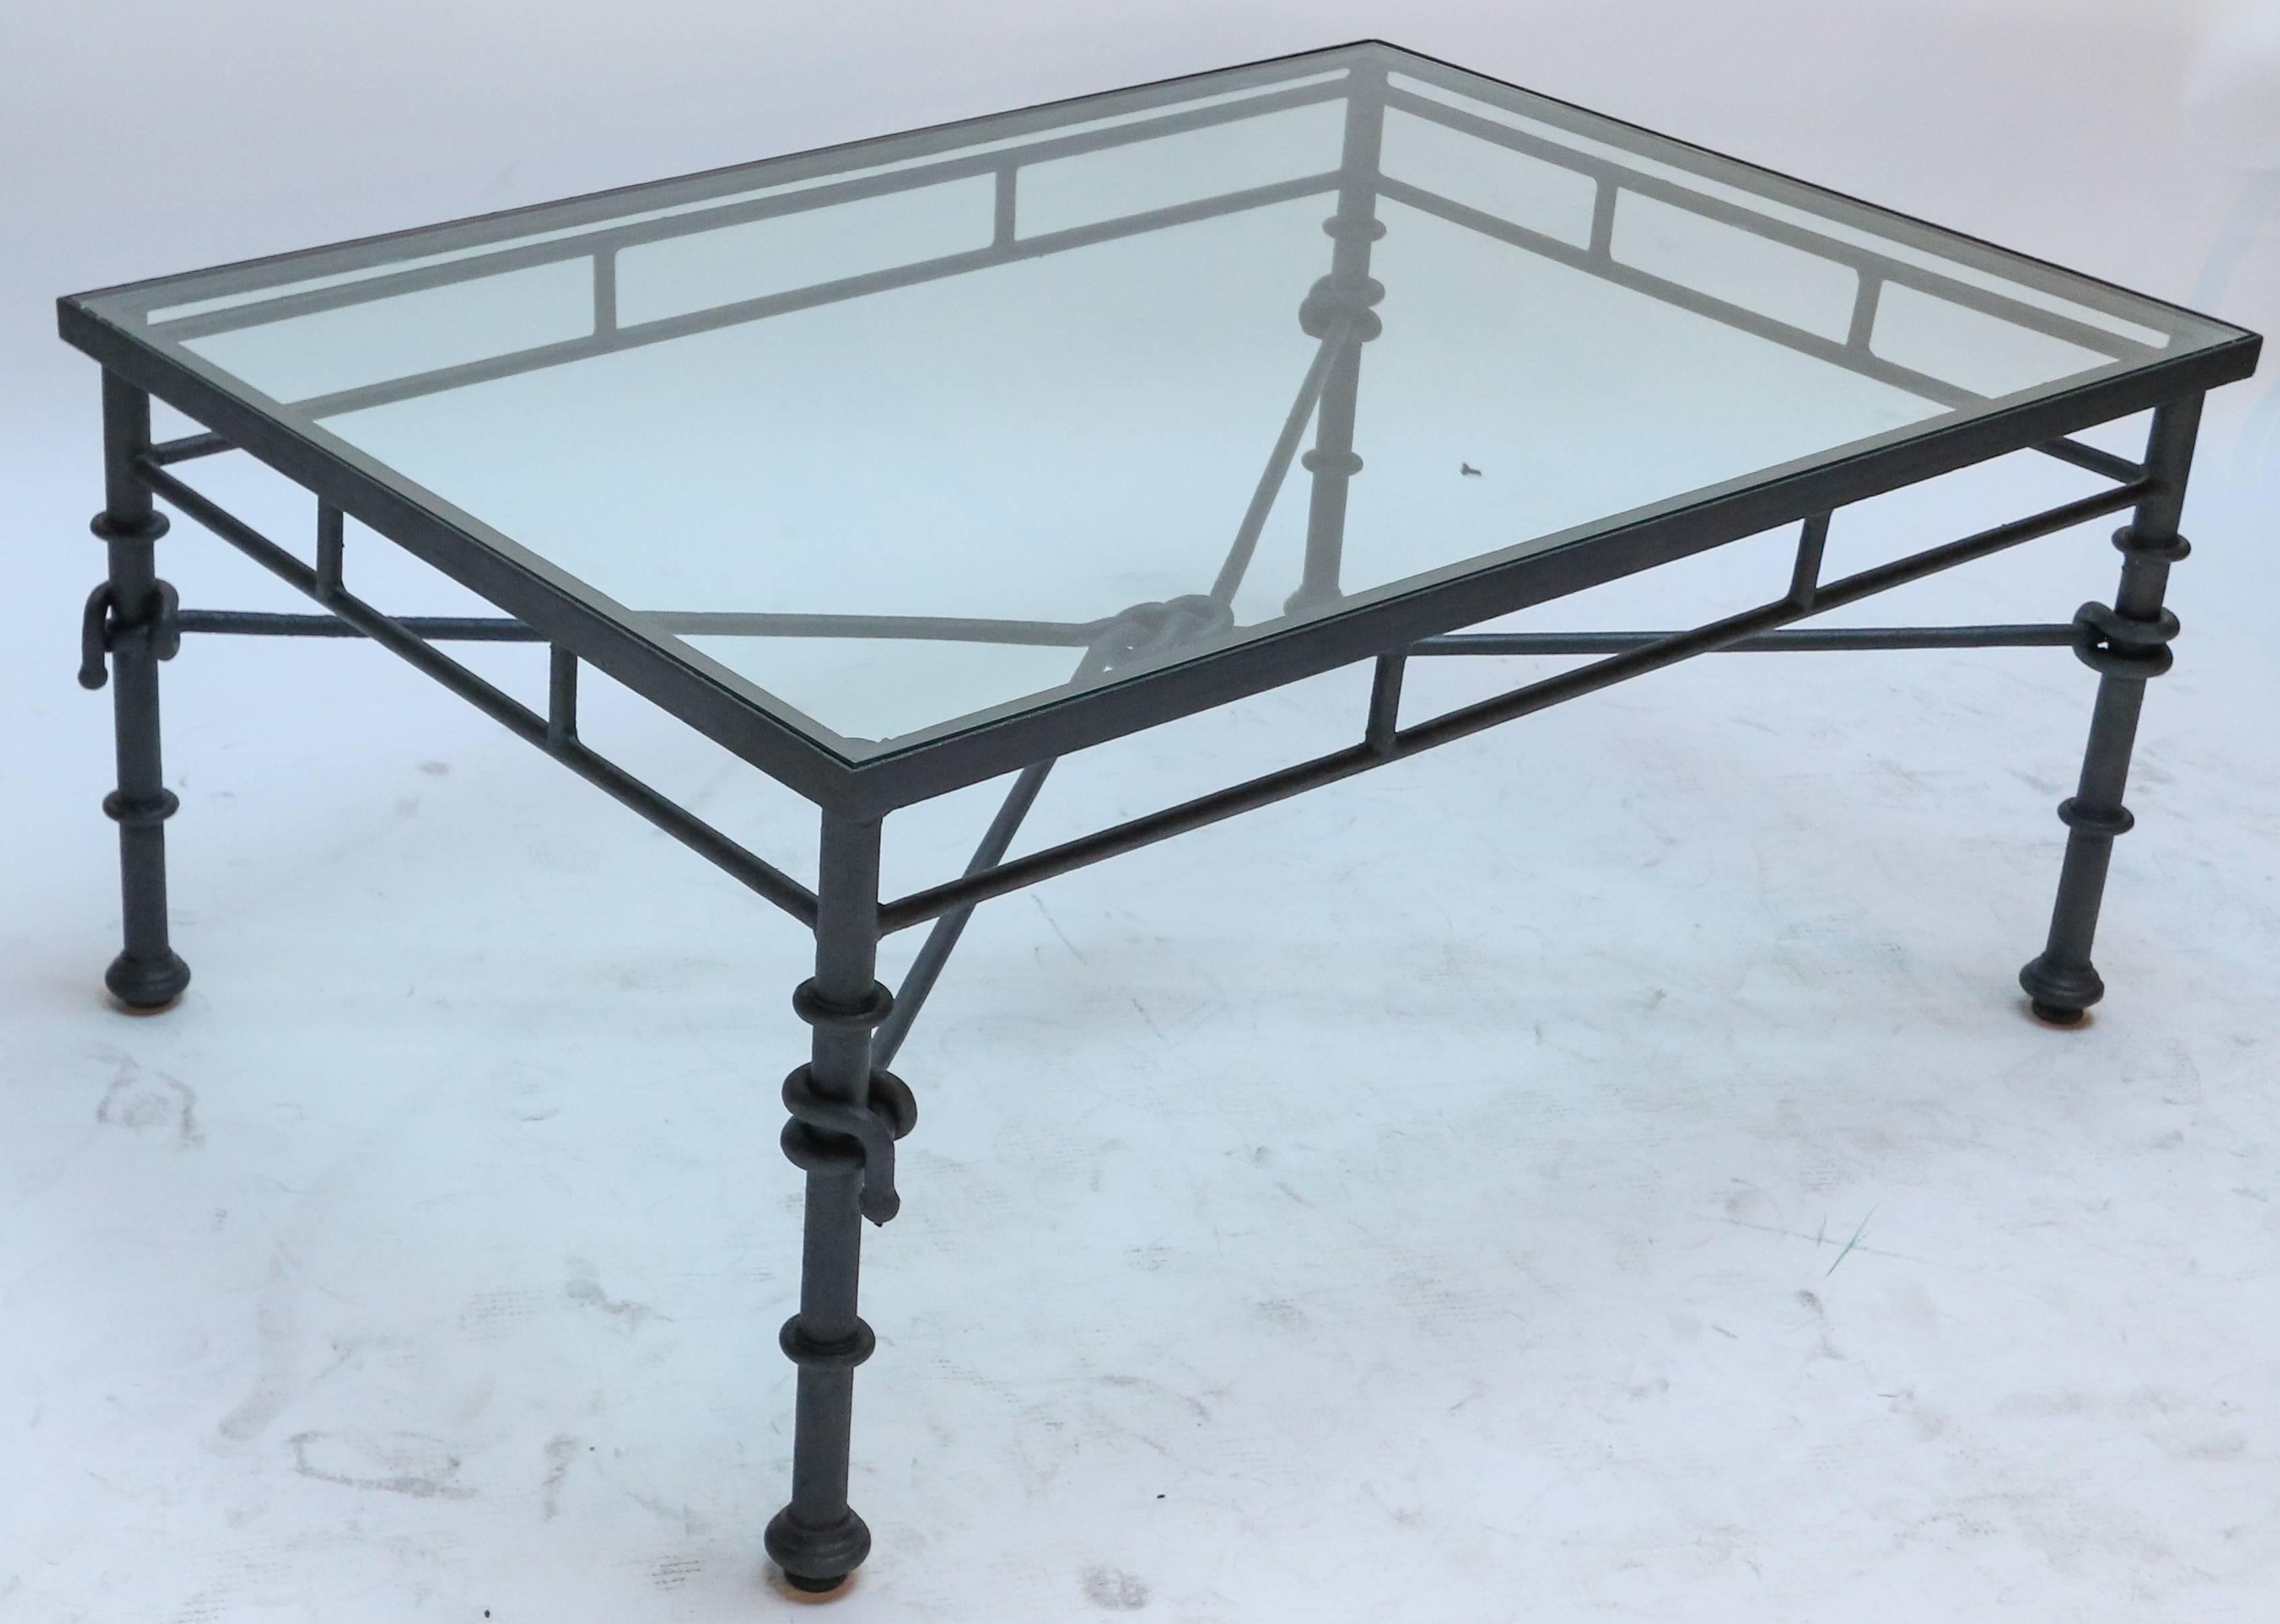 Italian rectangular iron coffee table with knot and rope details with glass top.